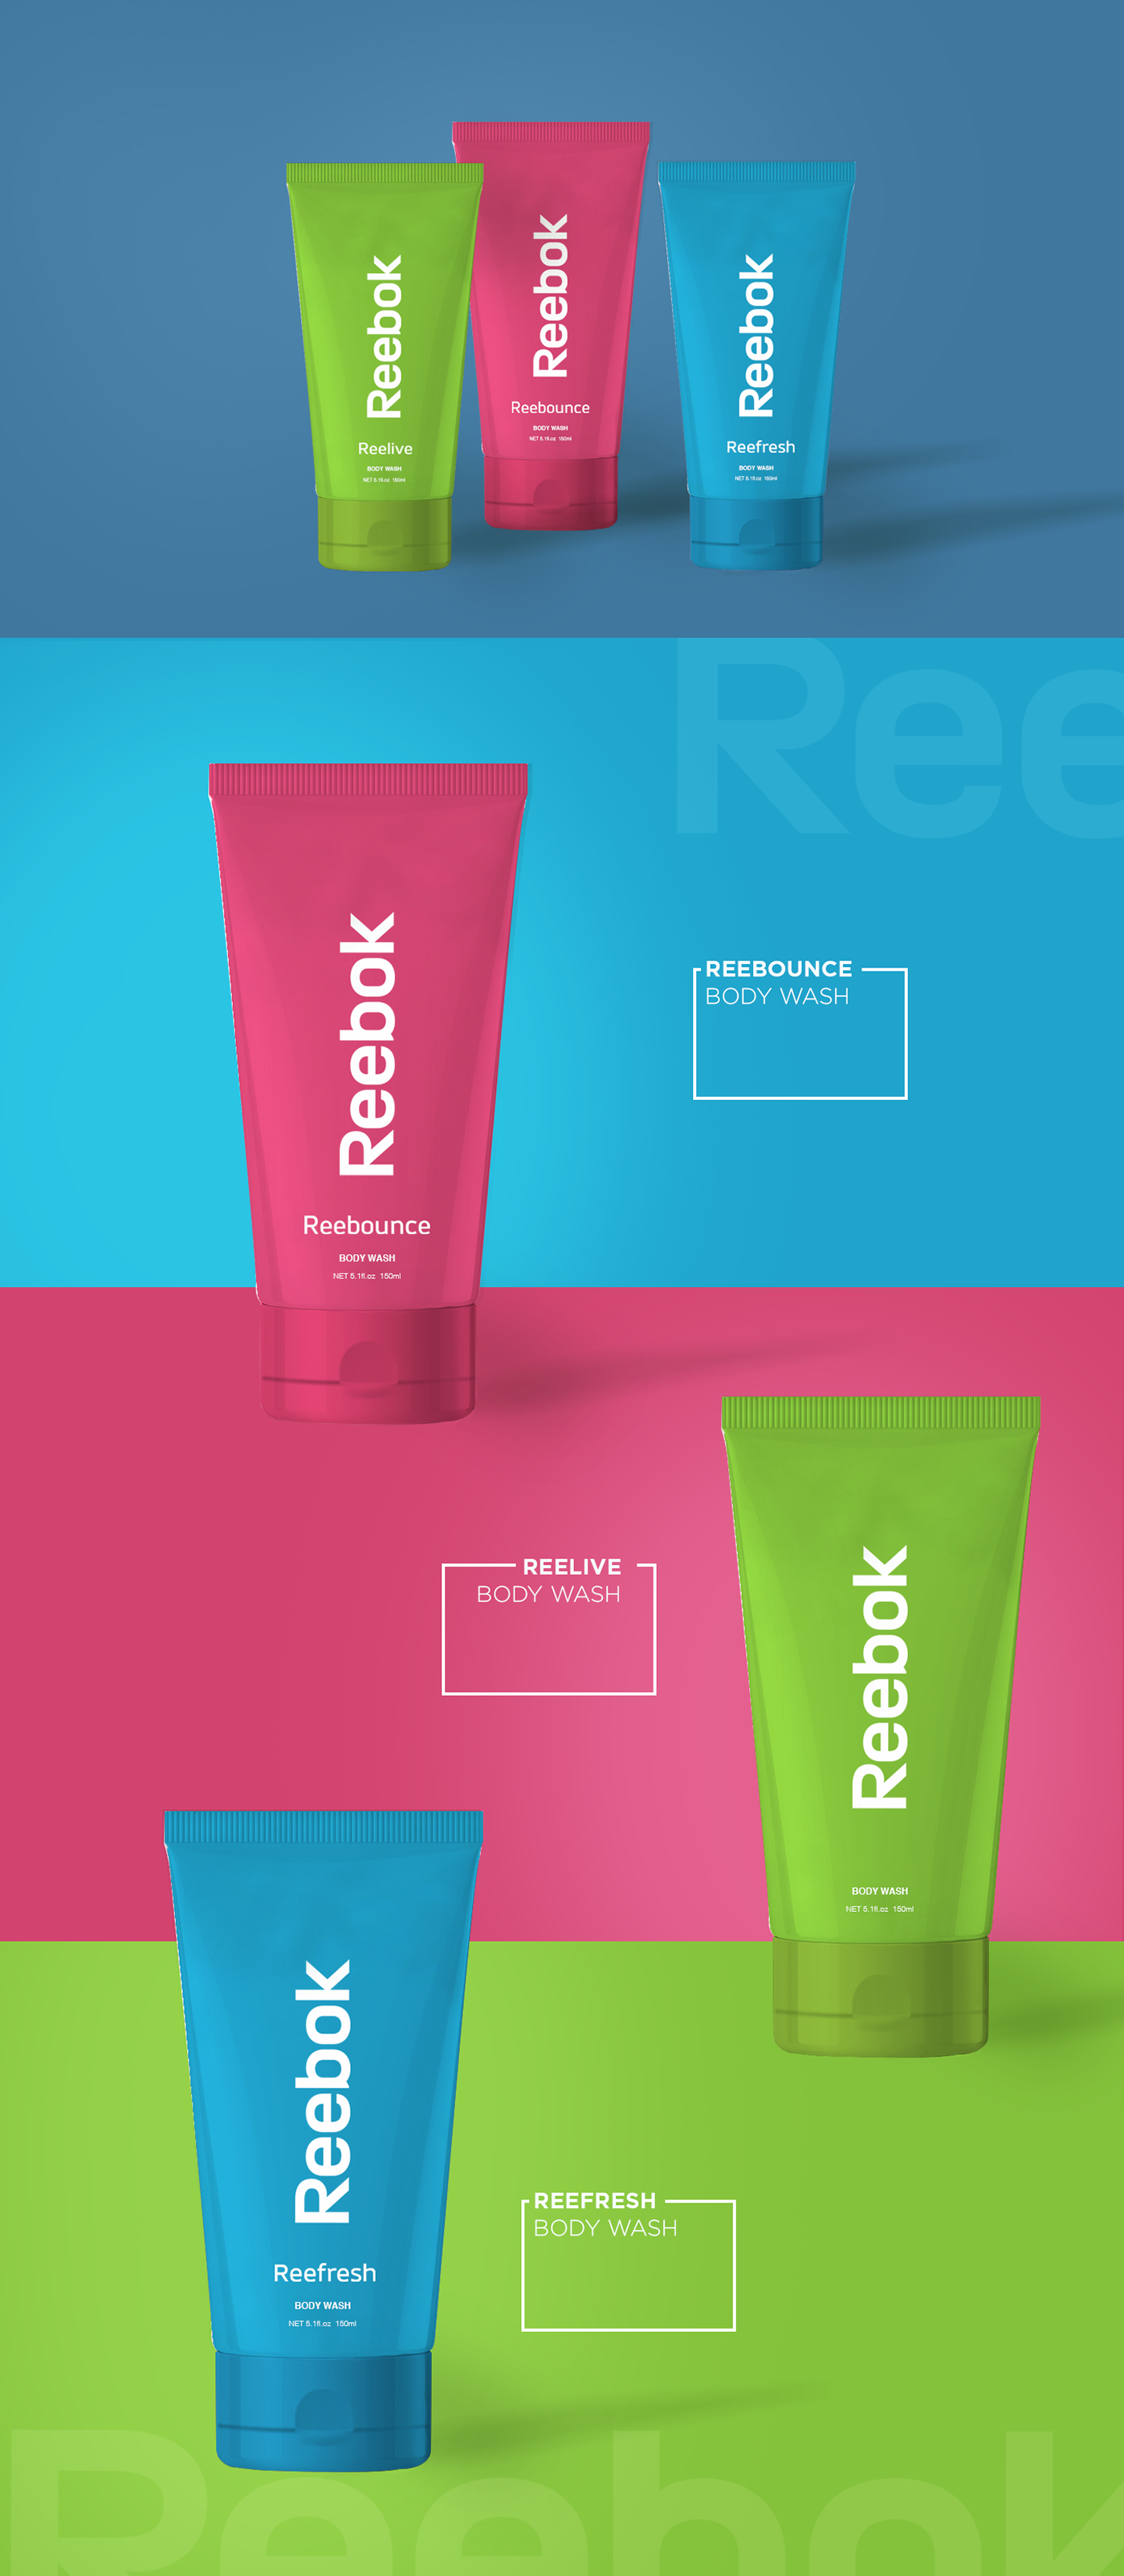 Reebok personal care  deo Product graphics DEO